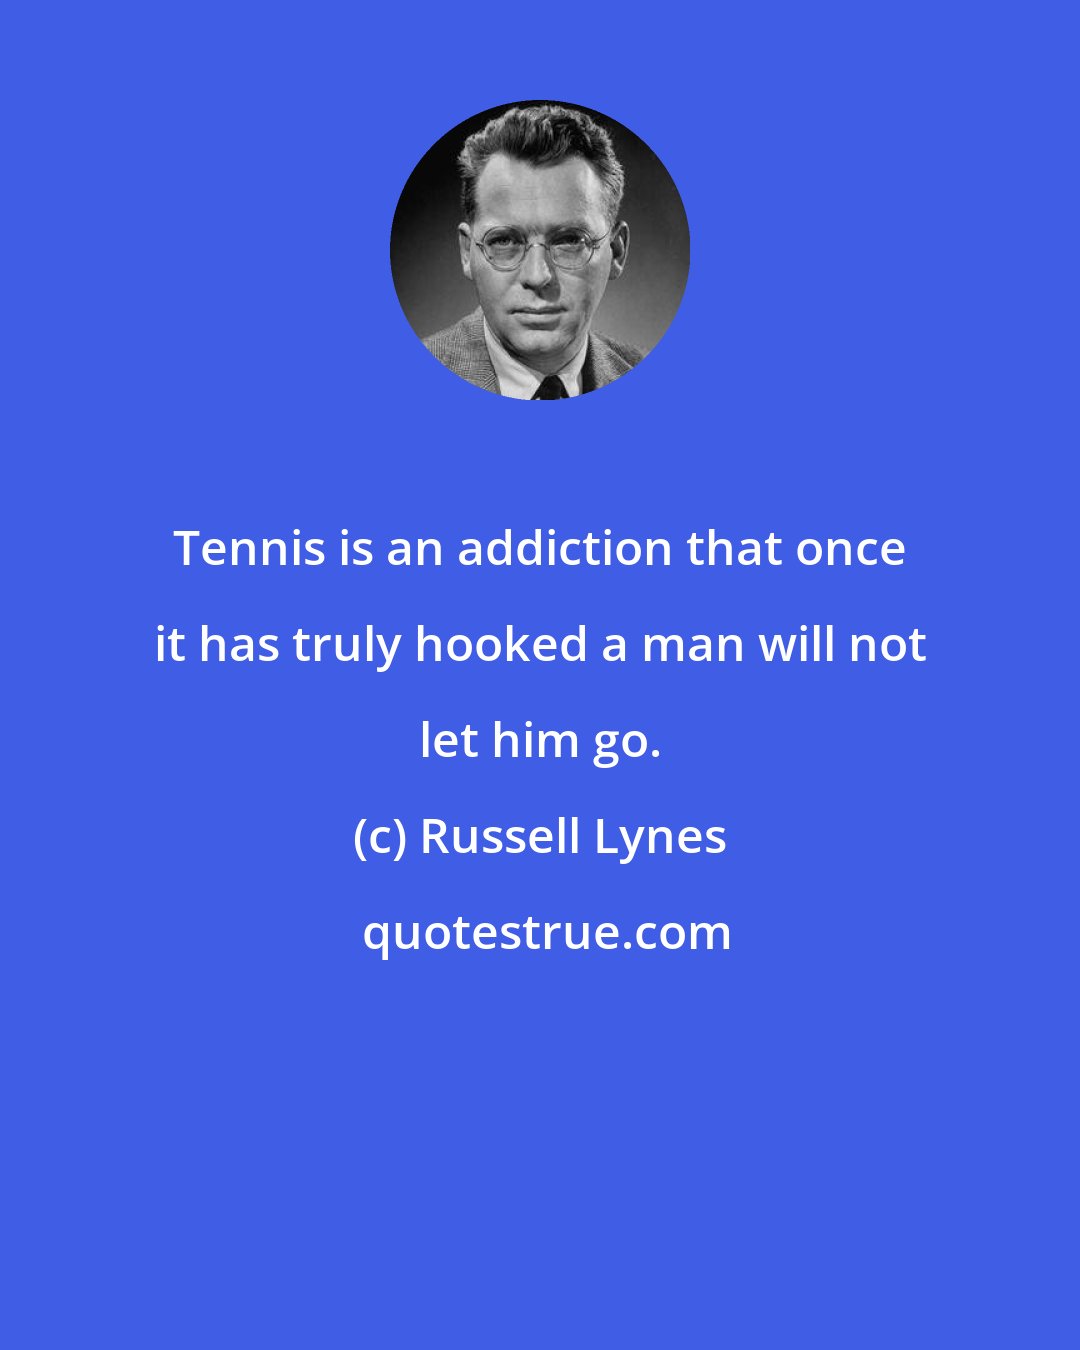 Russell Lynes: Tennis is an addiction that once it has truly hooked a man will not let him go.